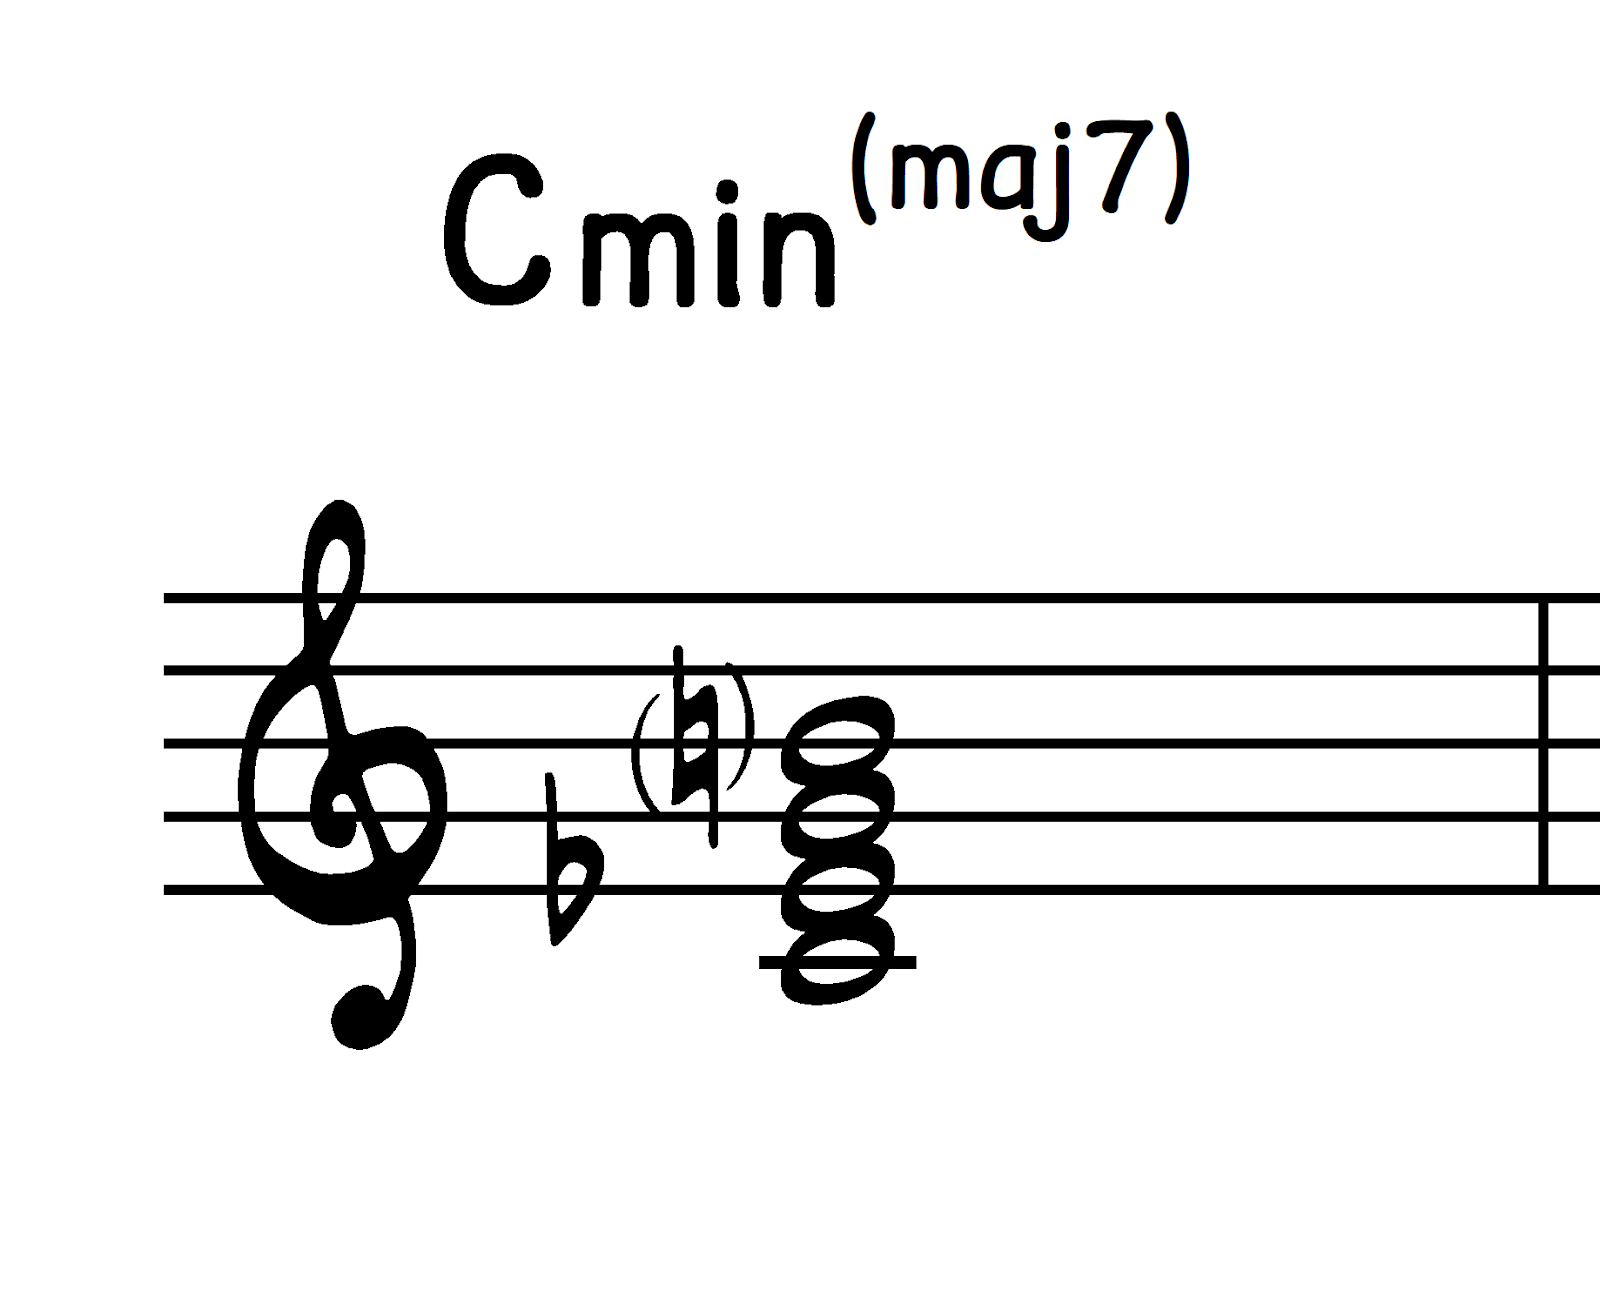 Cmin(maj7) chord in close root position.